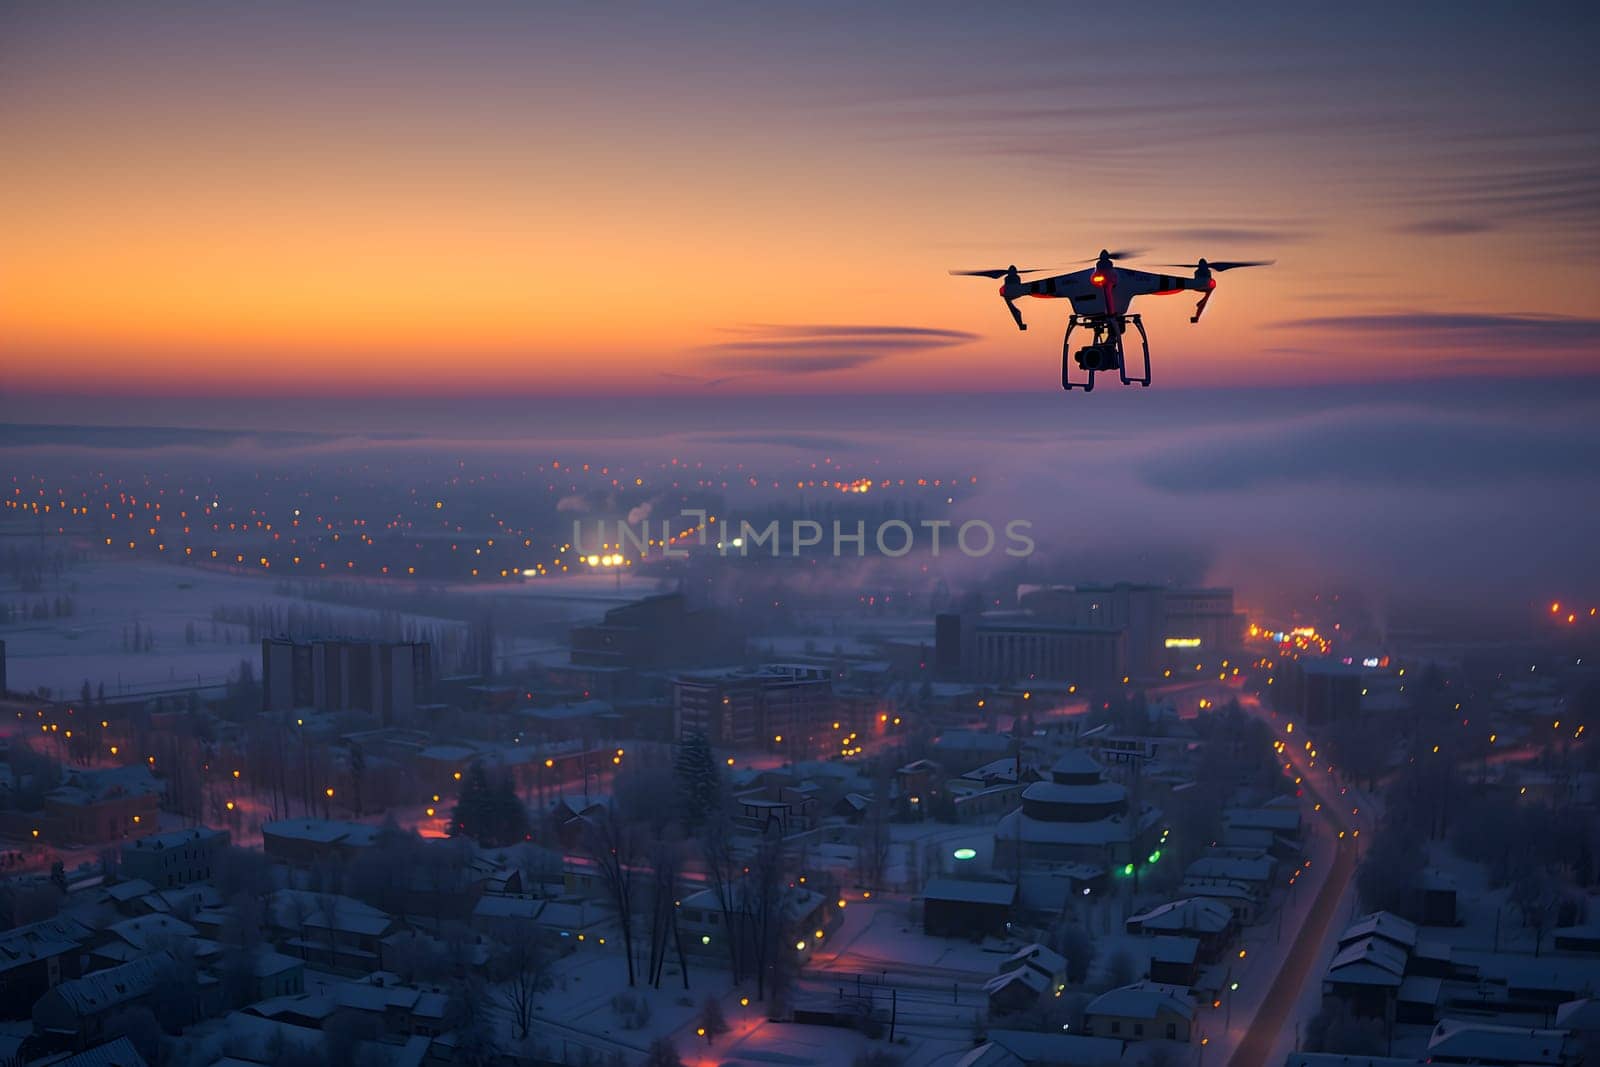 Flying drone above the city at snowy winter morning. Neural network generated image. Not based on any actual scene or pattern.